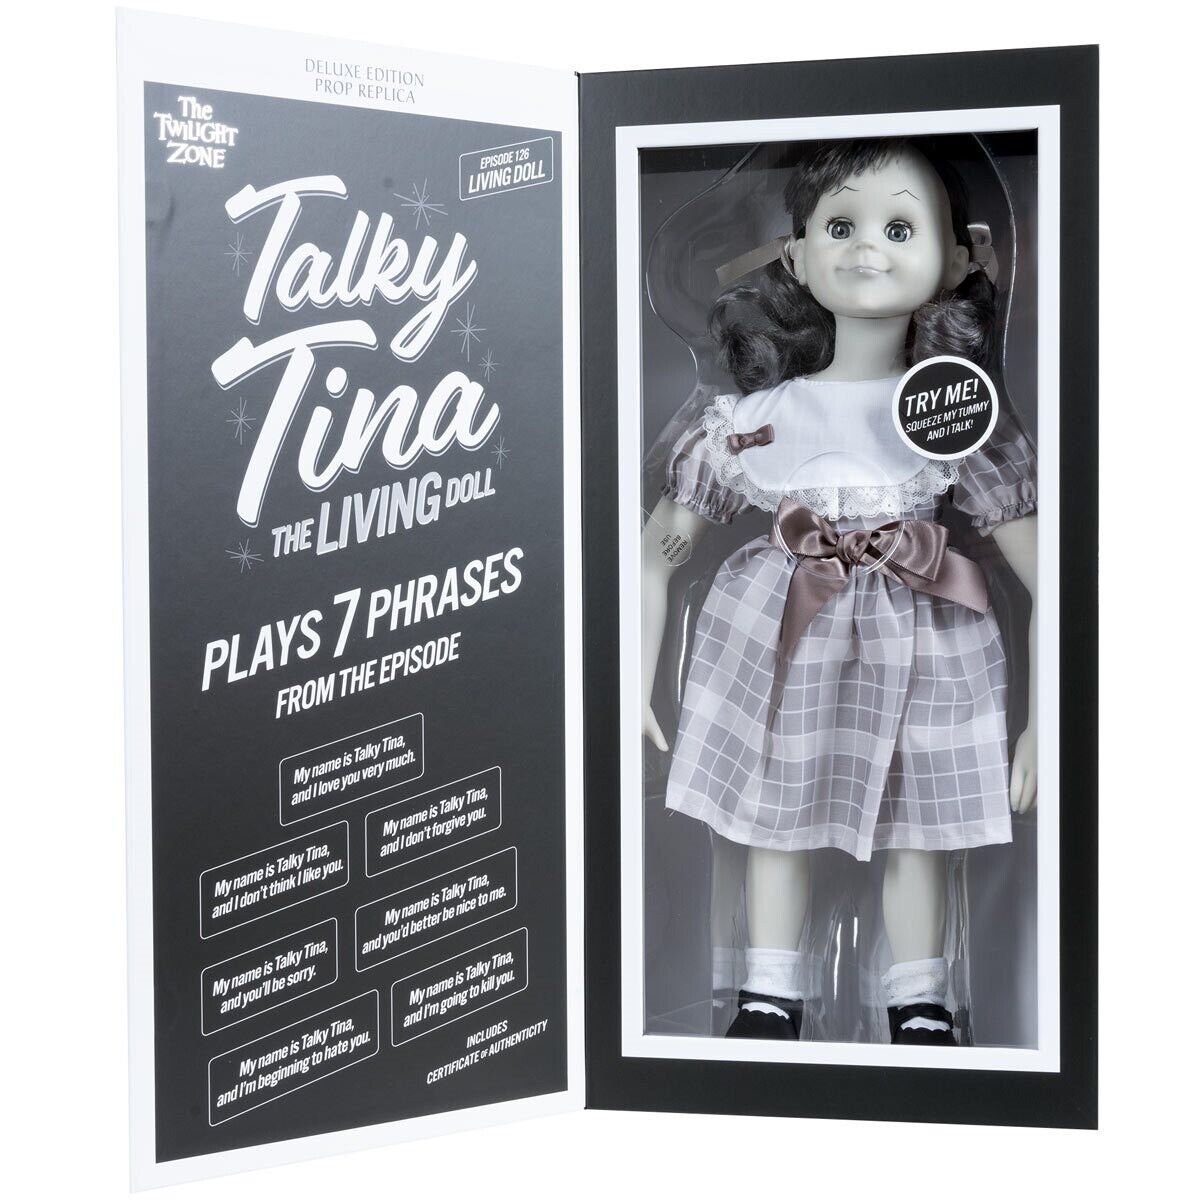 The Twilight Zone Talky Tina 18-Inch Prop Replica Doll Limited Edition 493/ 1004